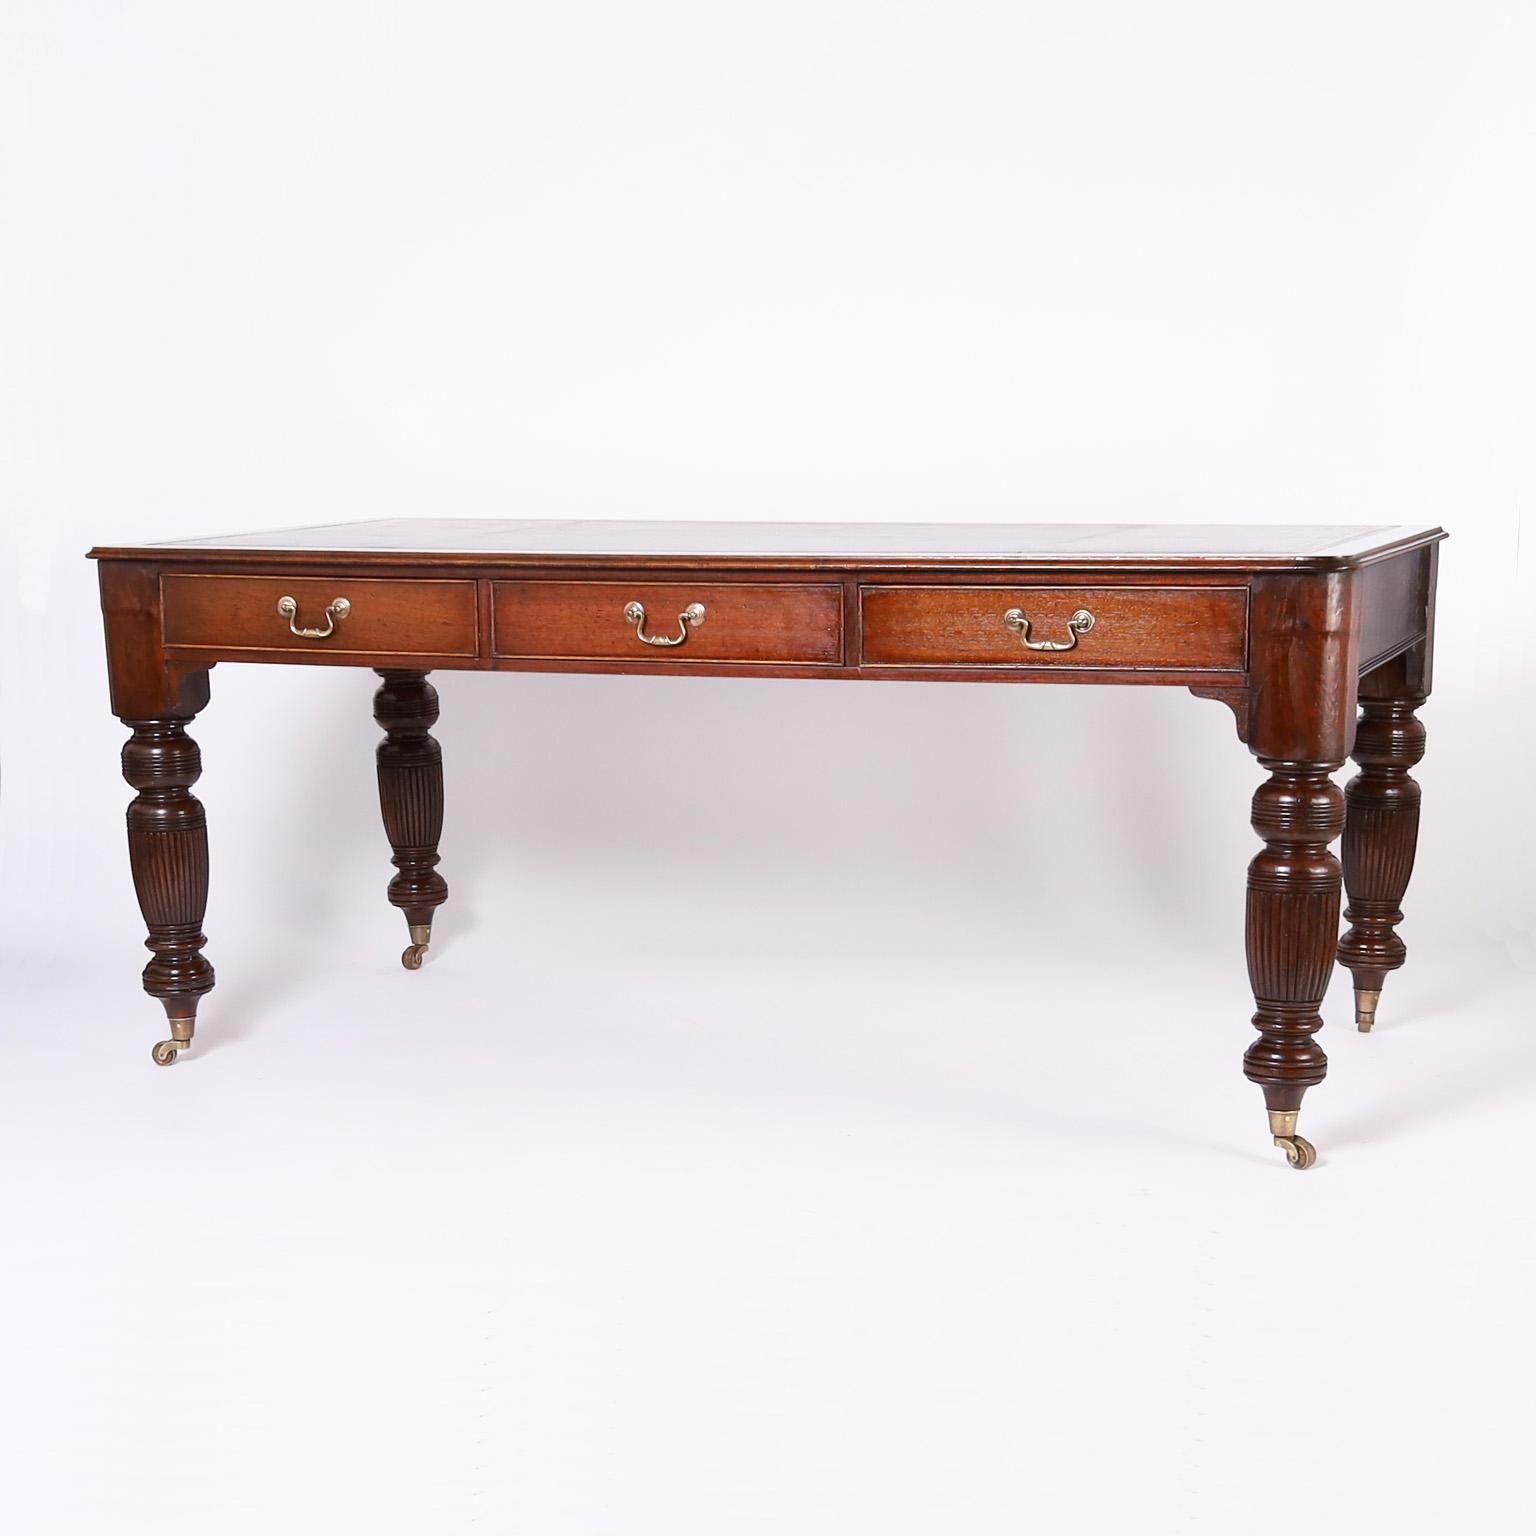 William IV English Leather Top Partners Desk